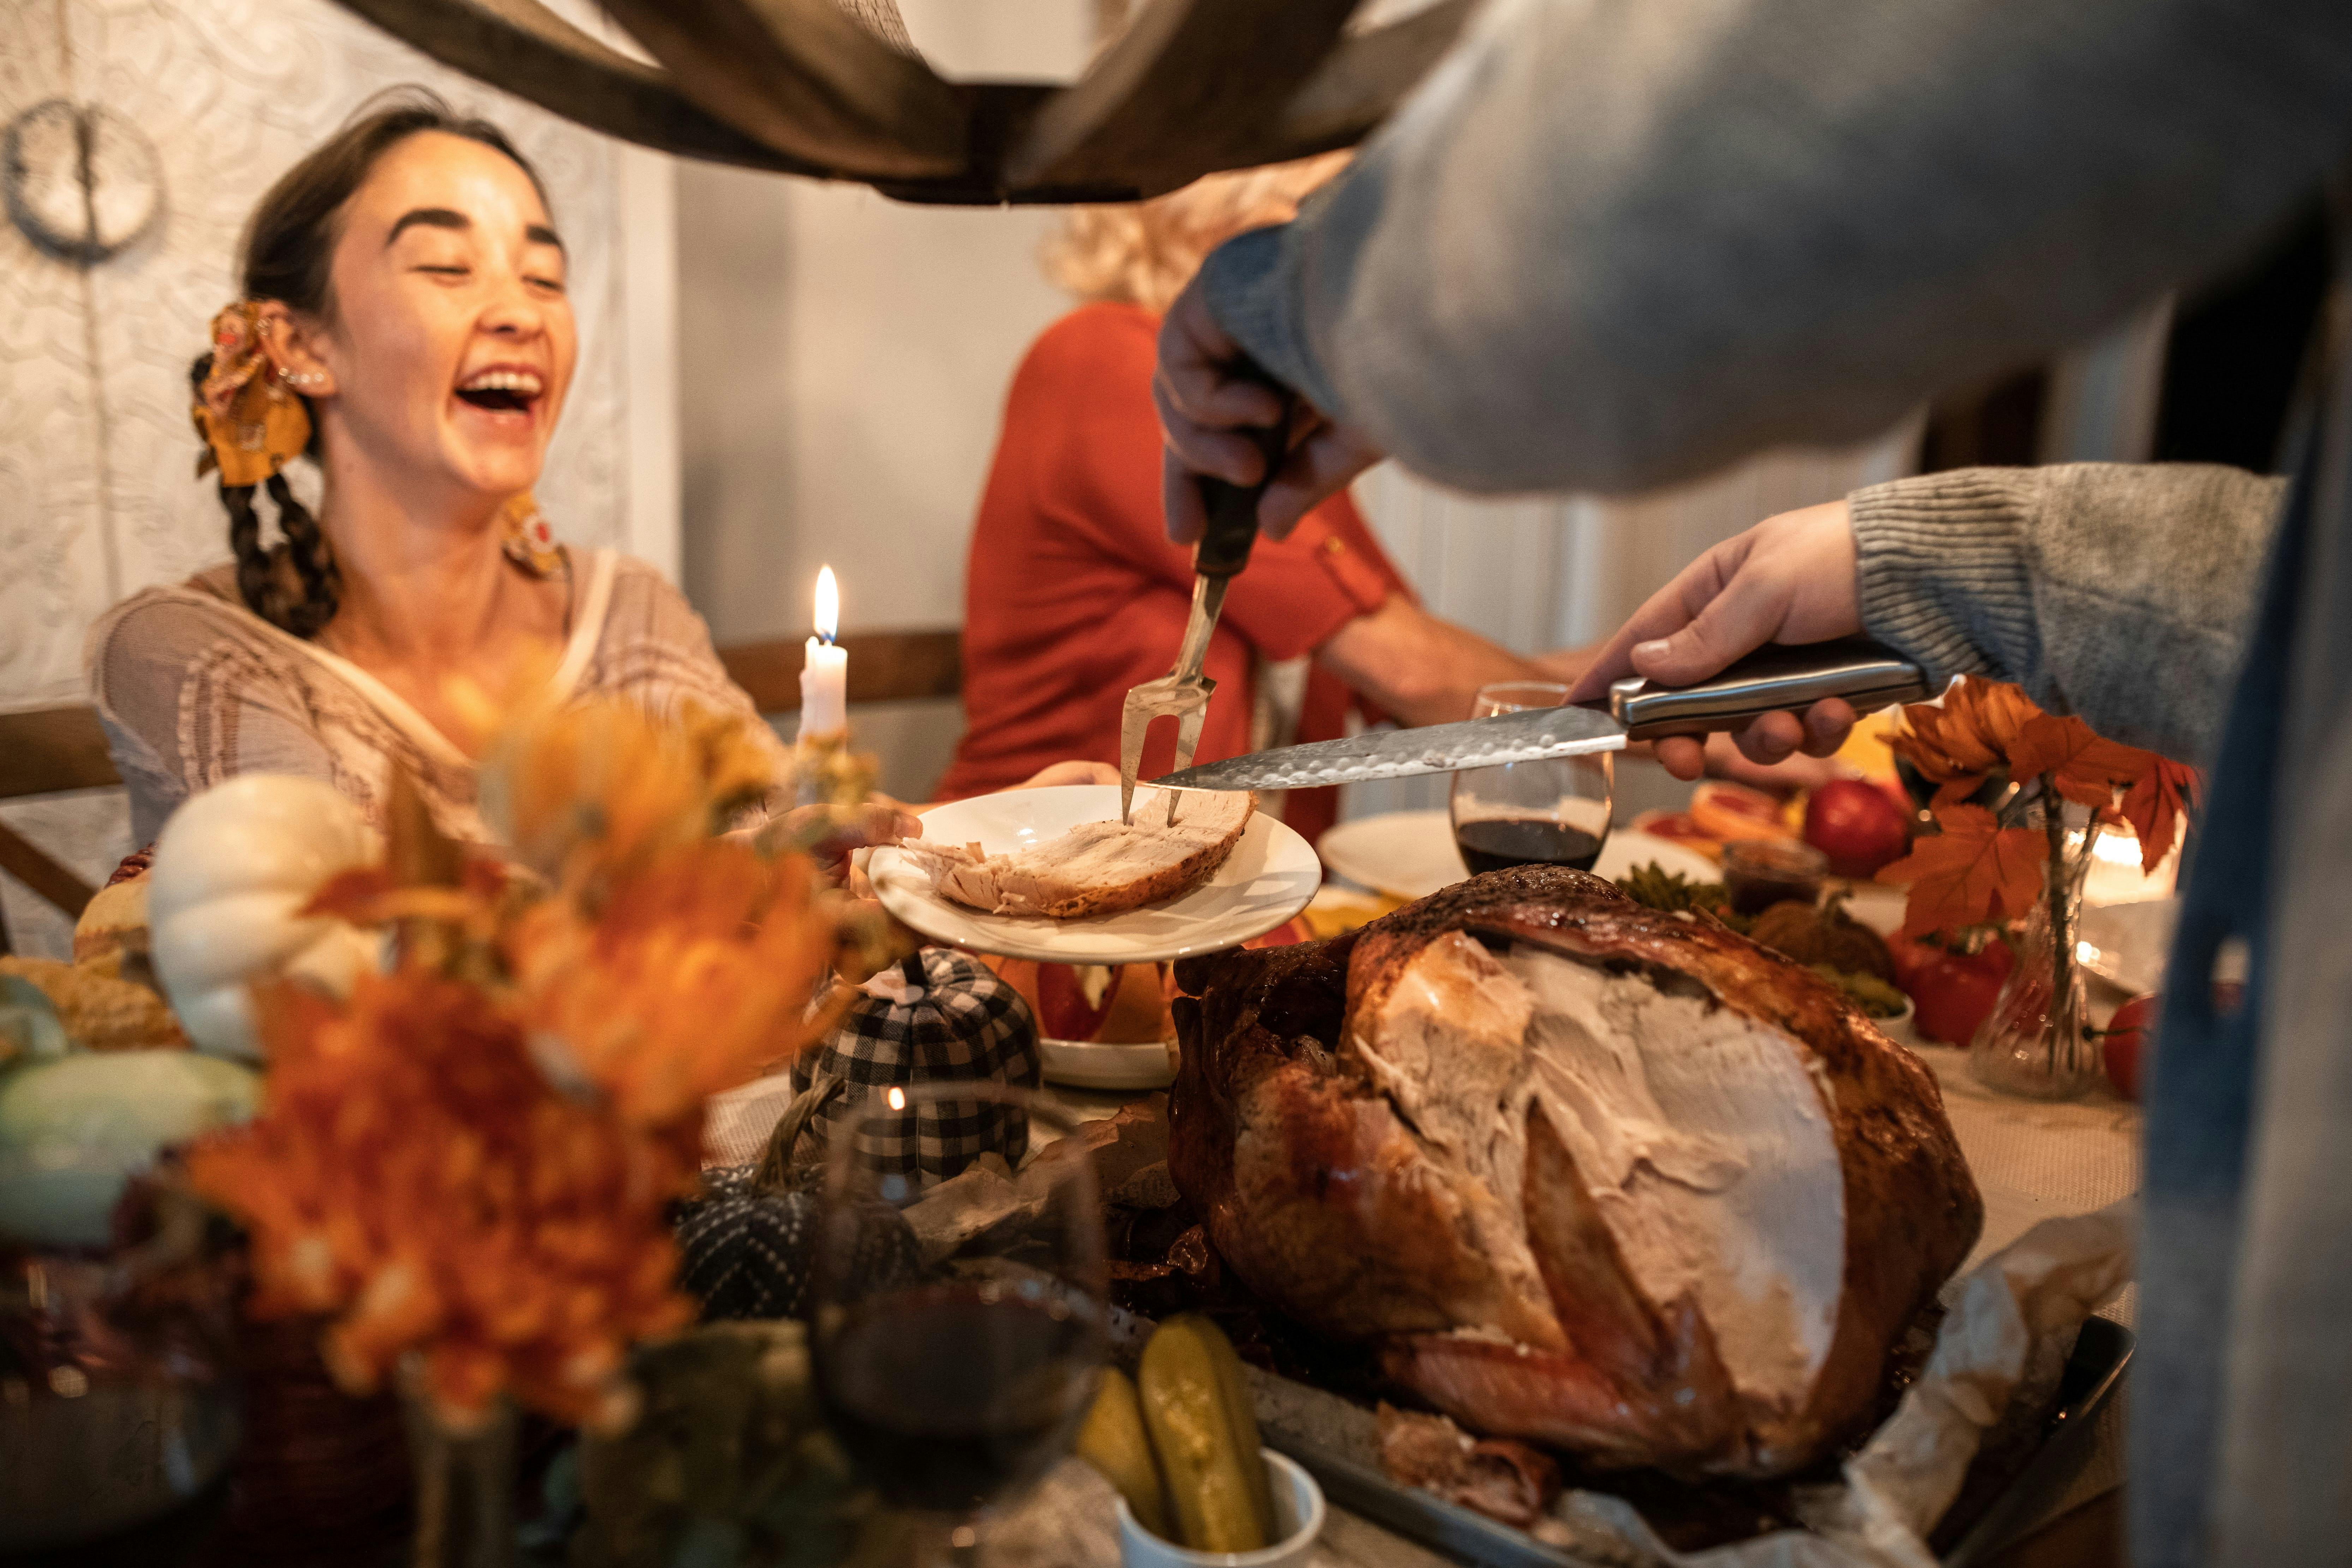 Surviving the holiday dinner table talk